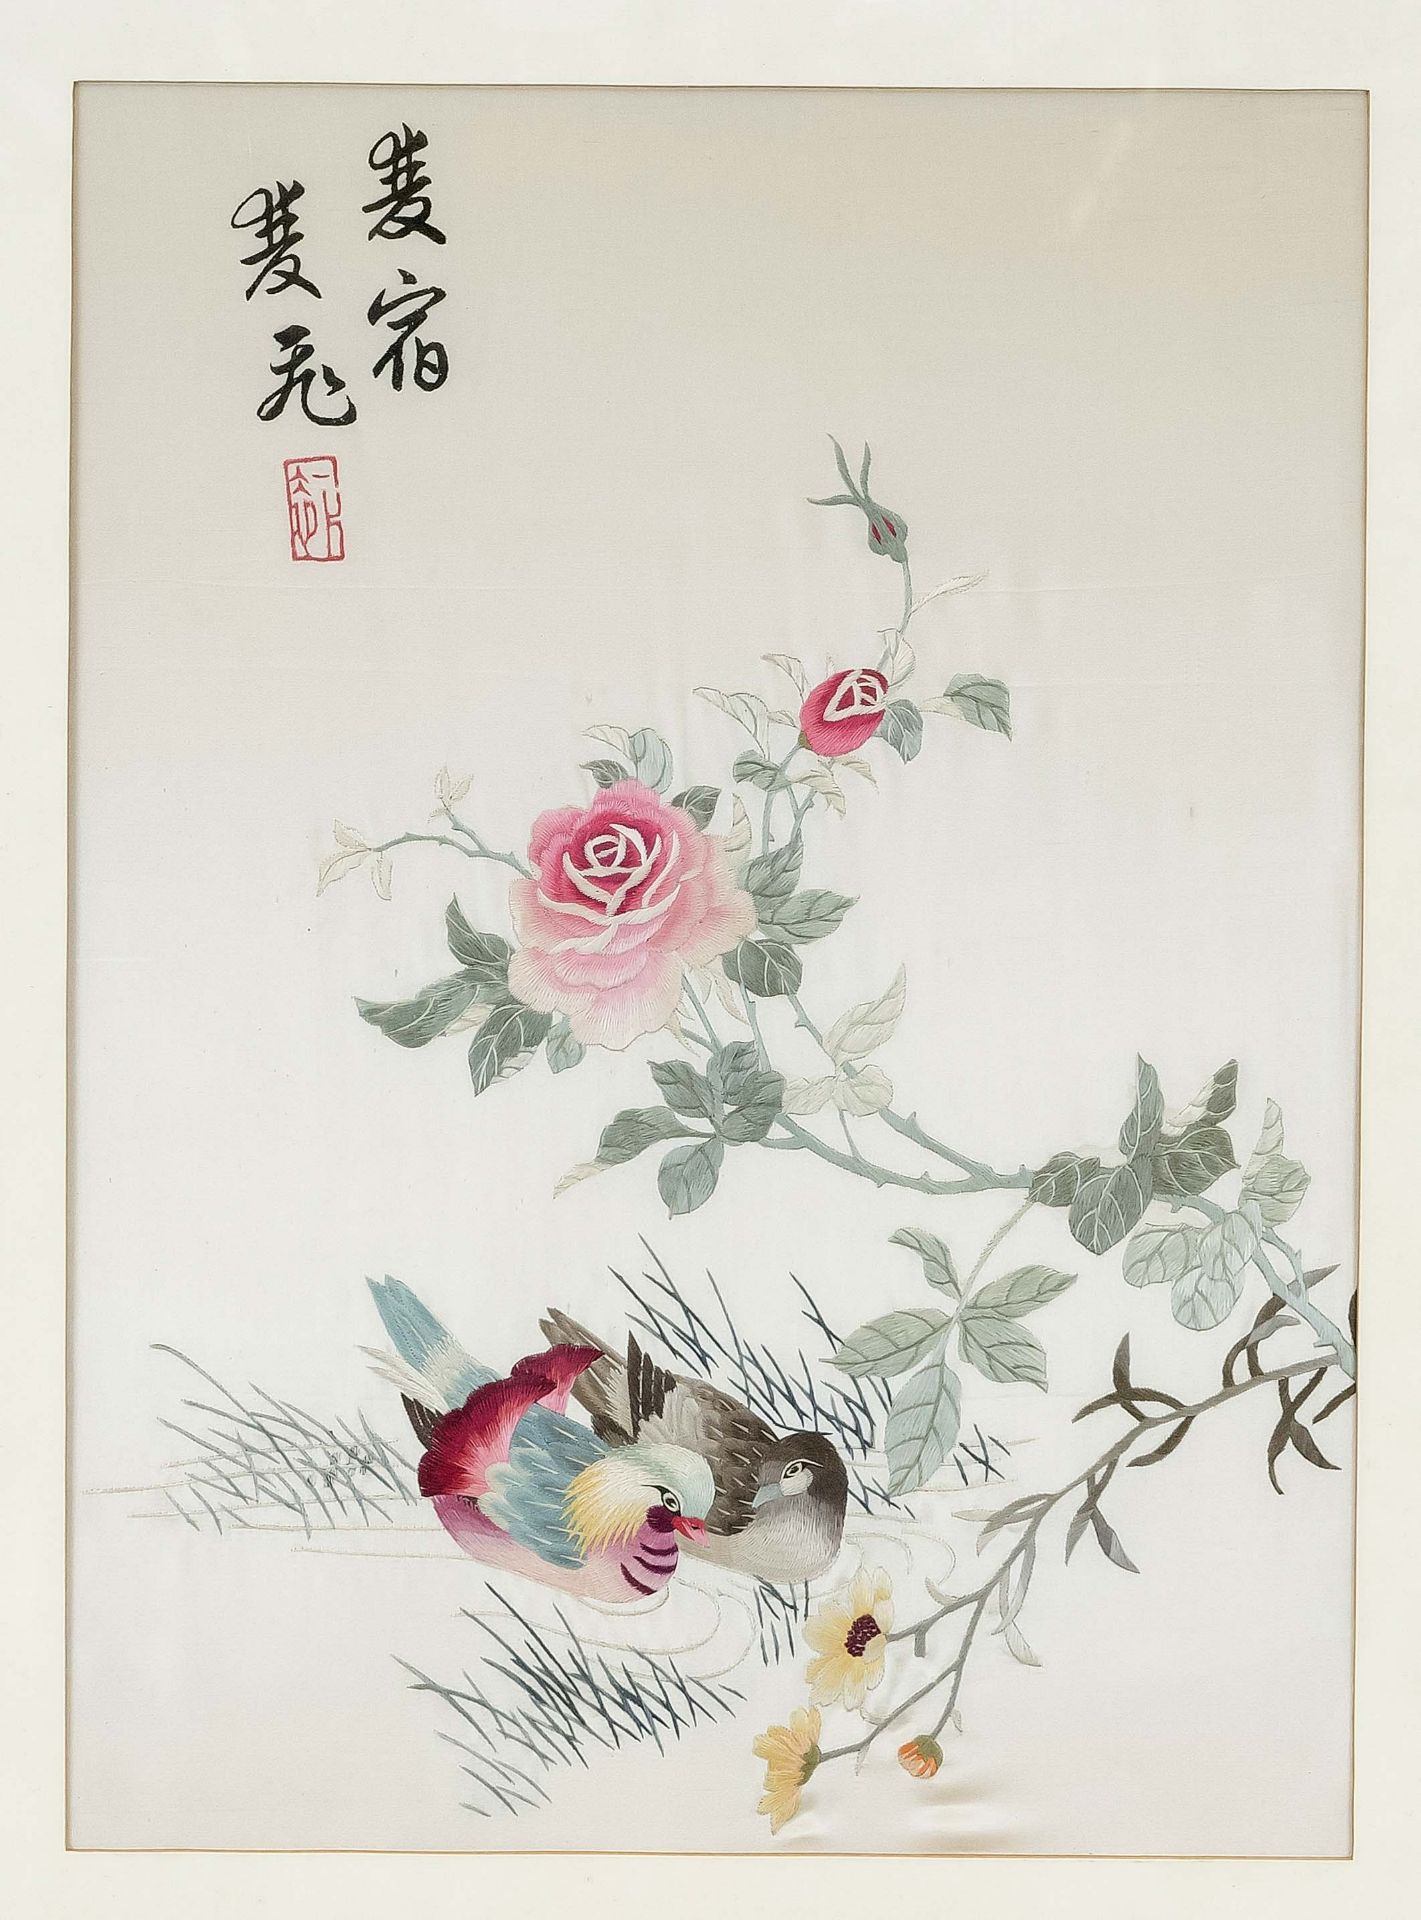 Silk embroidery, China, 20th century, ducks, roses, characters. Framed behind glass, slightly